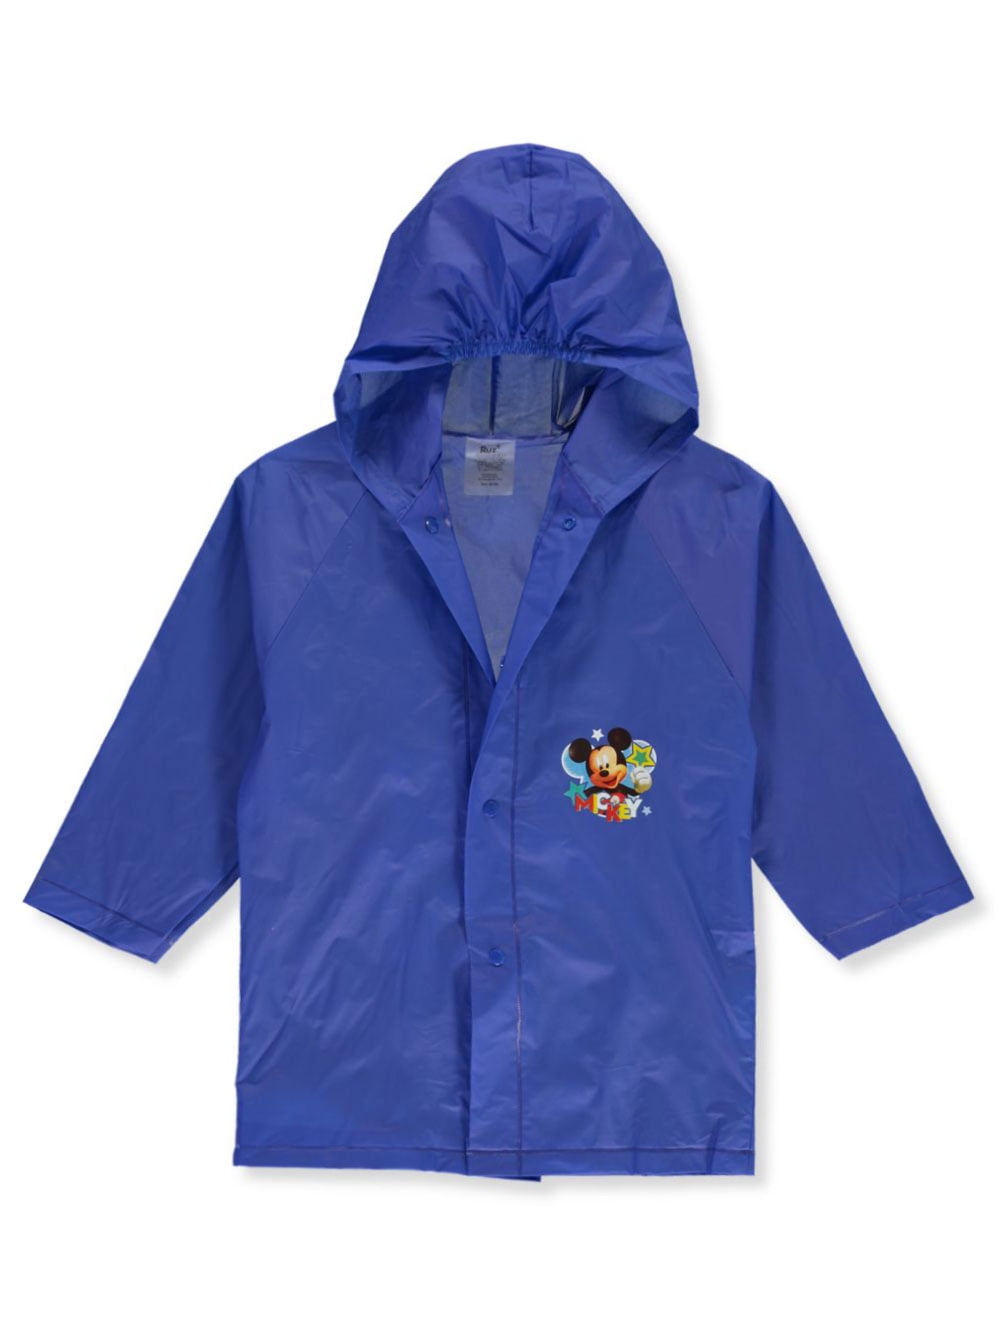 Disney Disney Mickey Mouse Graphic Party Hooded Rain